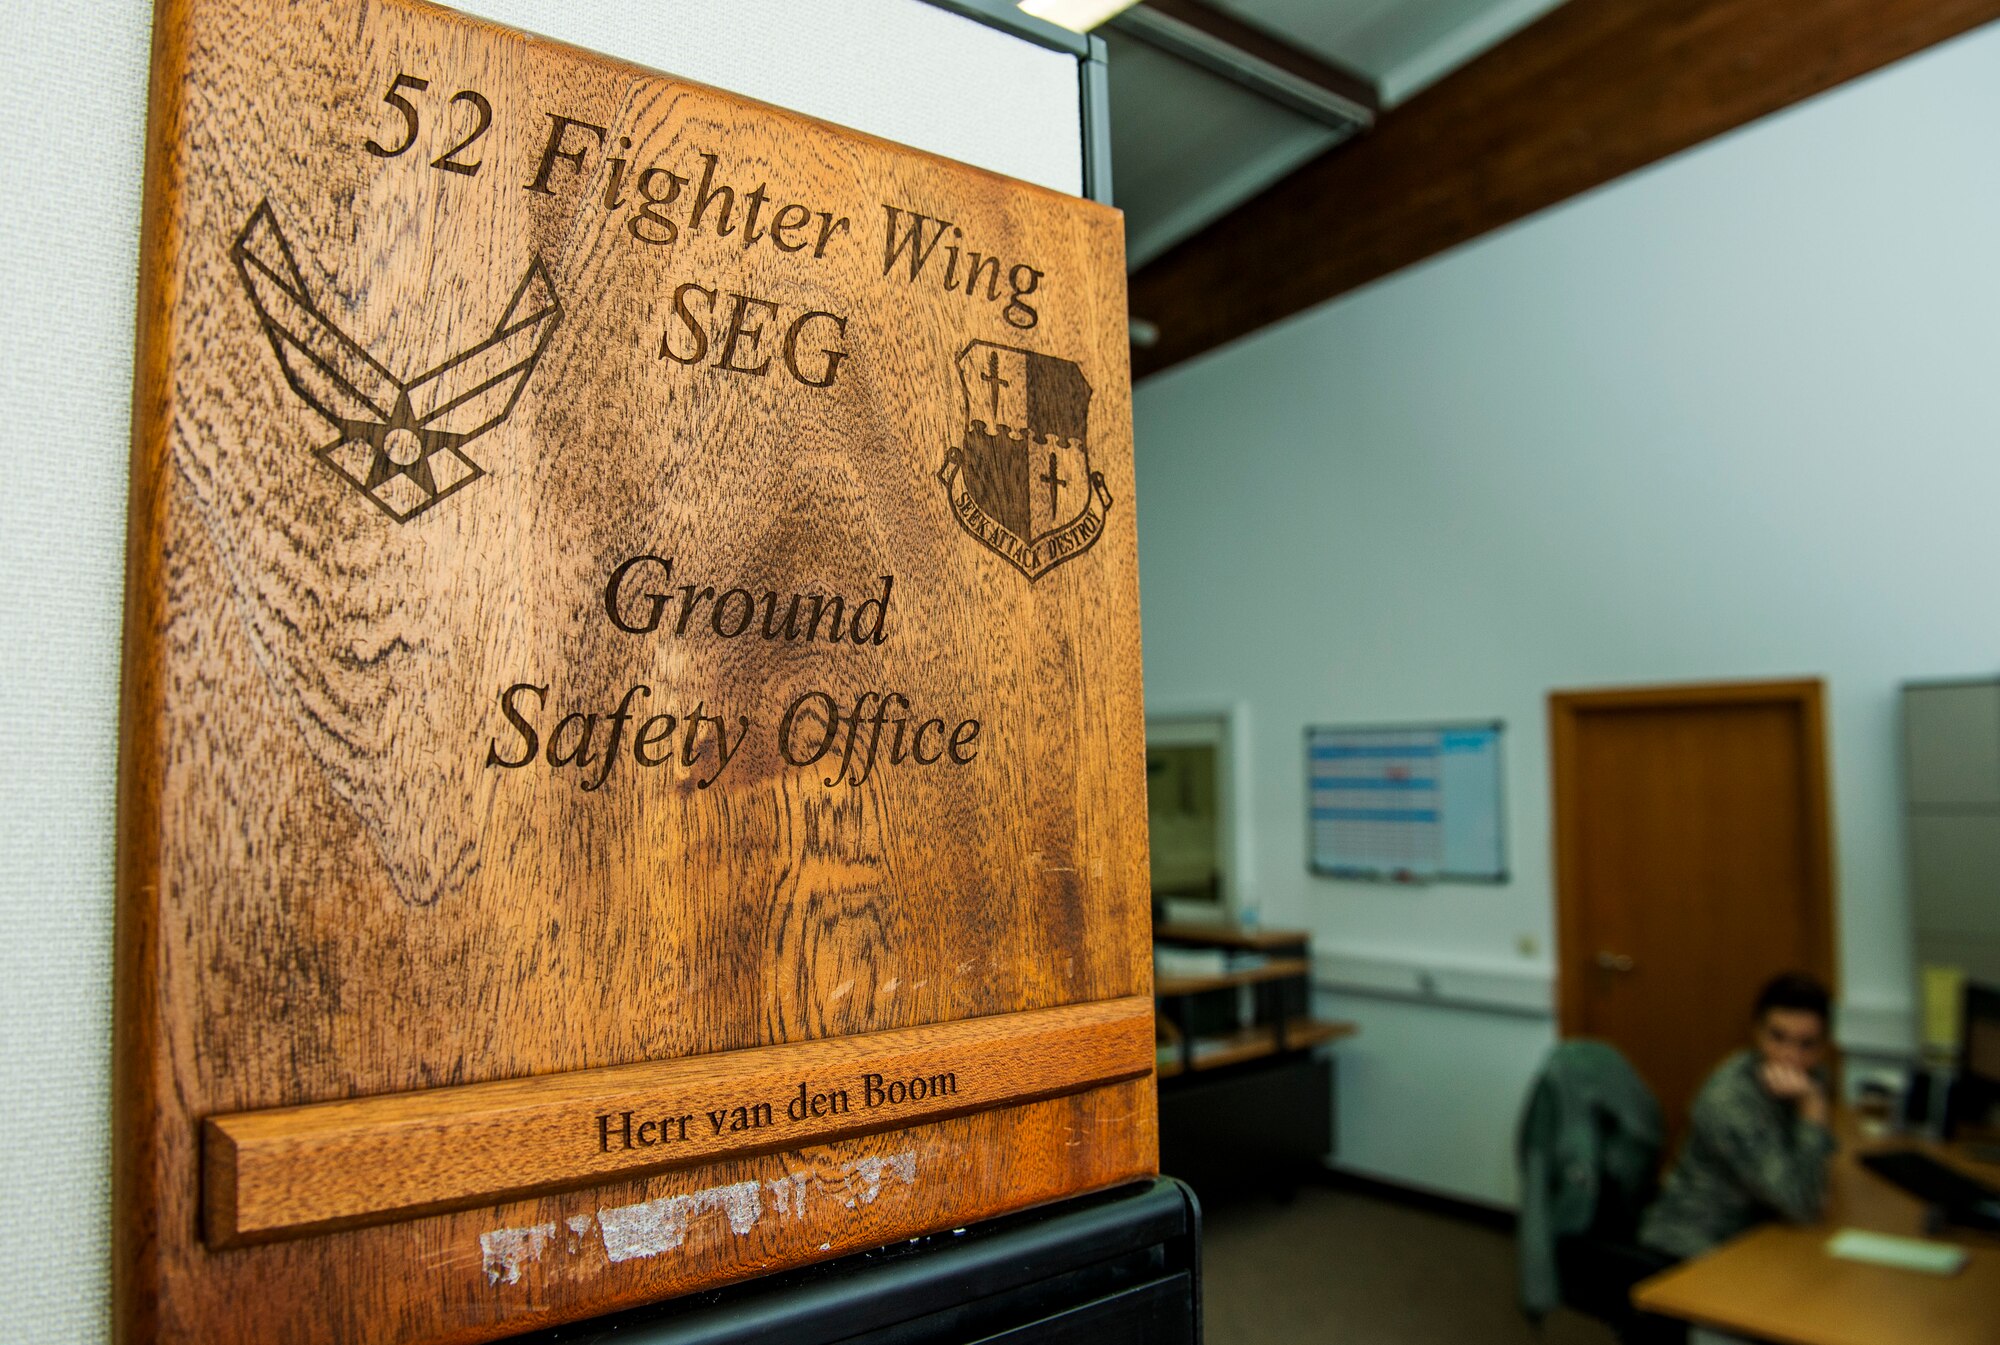 The 52nd Fighter Wing Ground Safety Office sign is displayed in their building before a training session at Spangdahlem Air Base, Germany, Jan. 8, 2016. The office runs the Saber Driving Course program, which trains Airmen how to operate vehicles during dangerous road conditions. (U.S. Air Force photo by Airman 1st Class Timothy Kim/Released)